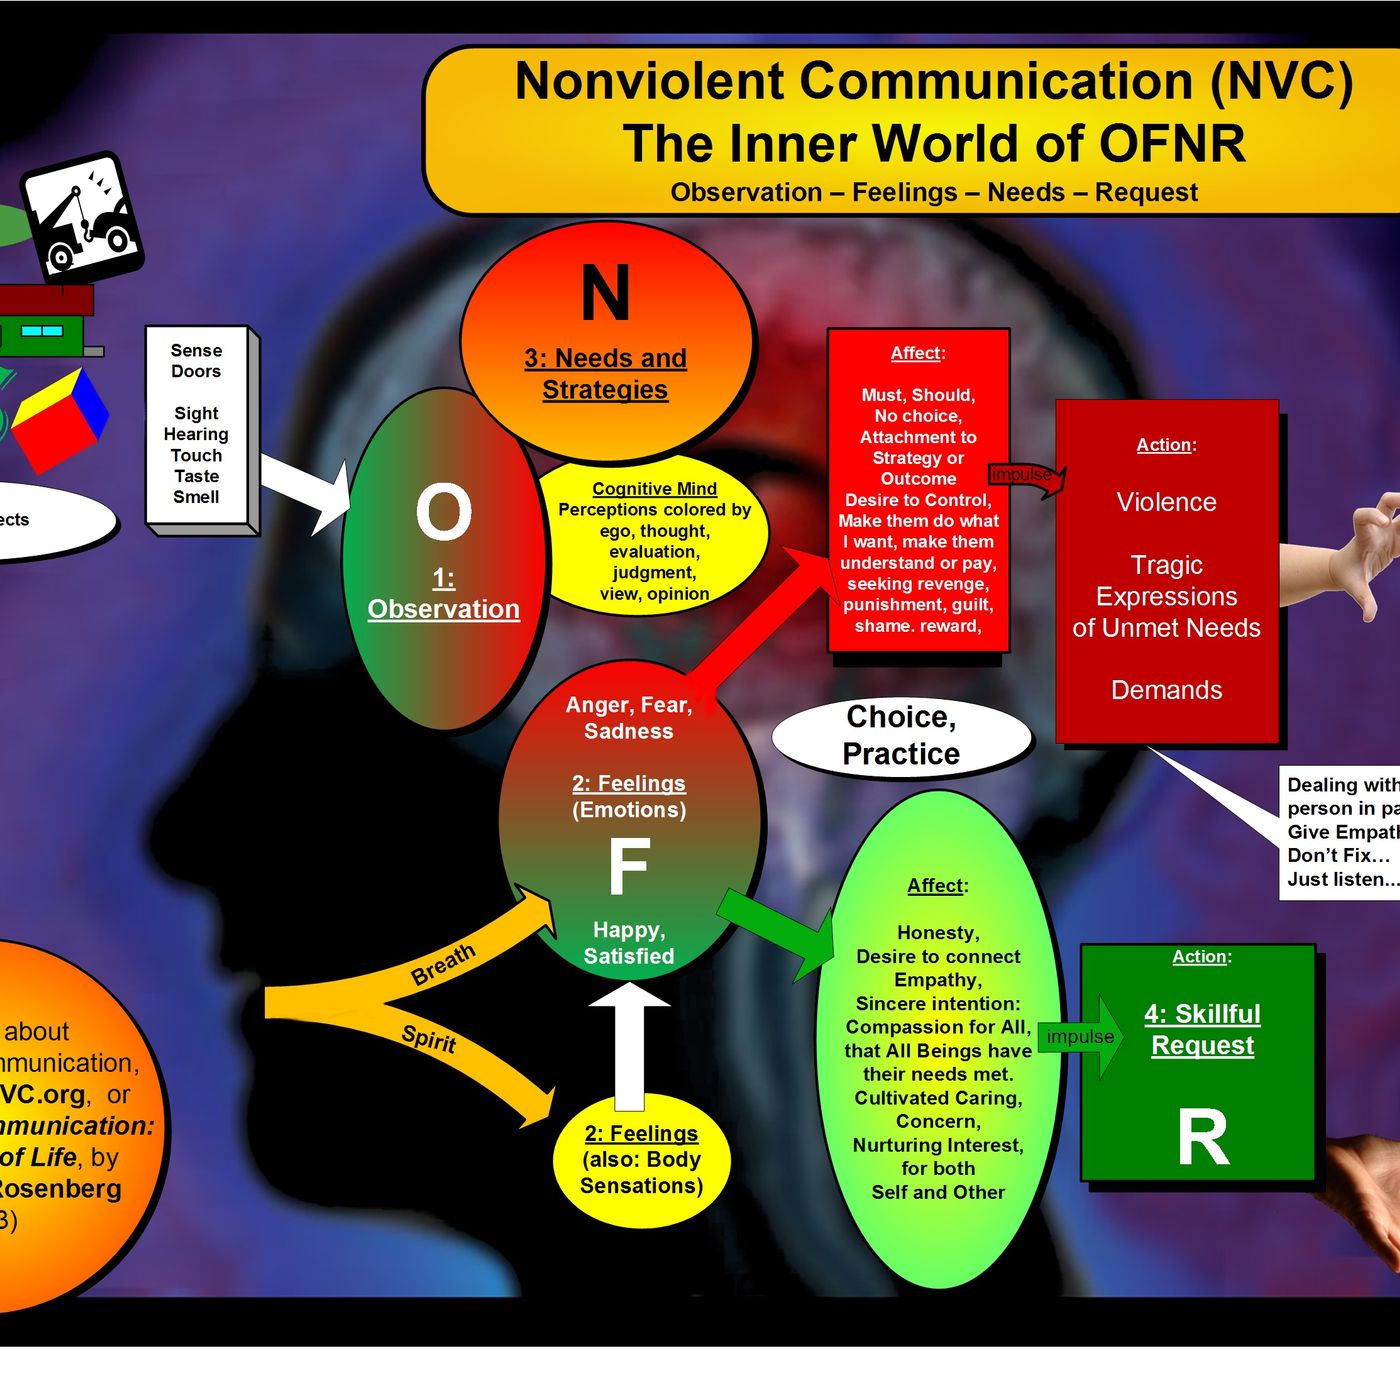 Communication for a World that Works - Nonviolent Communication Revisited